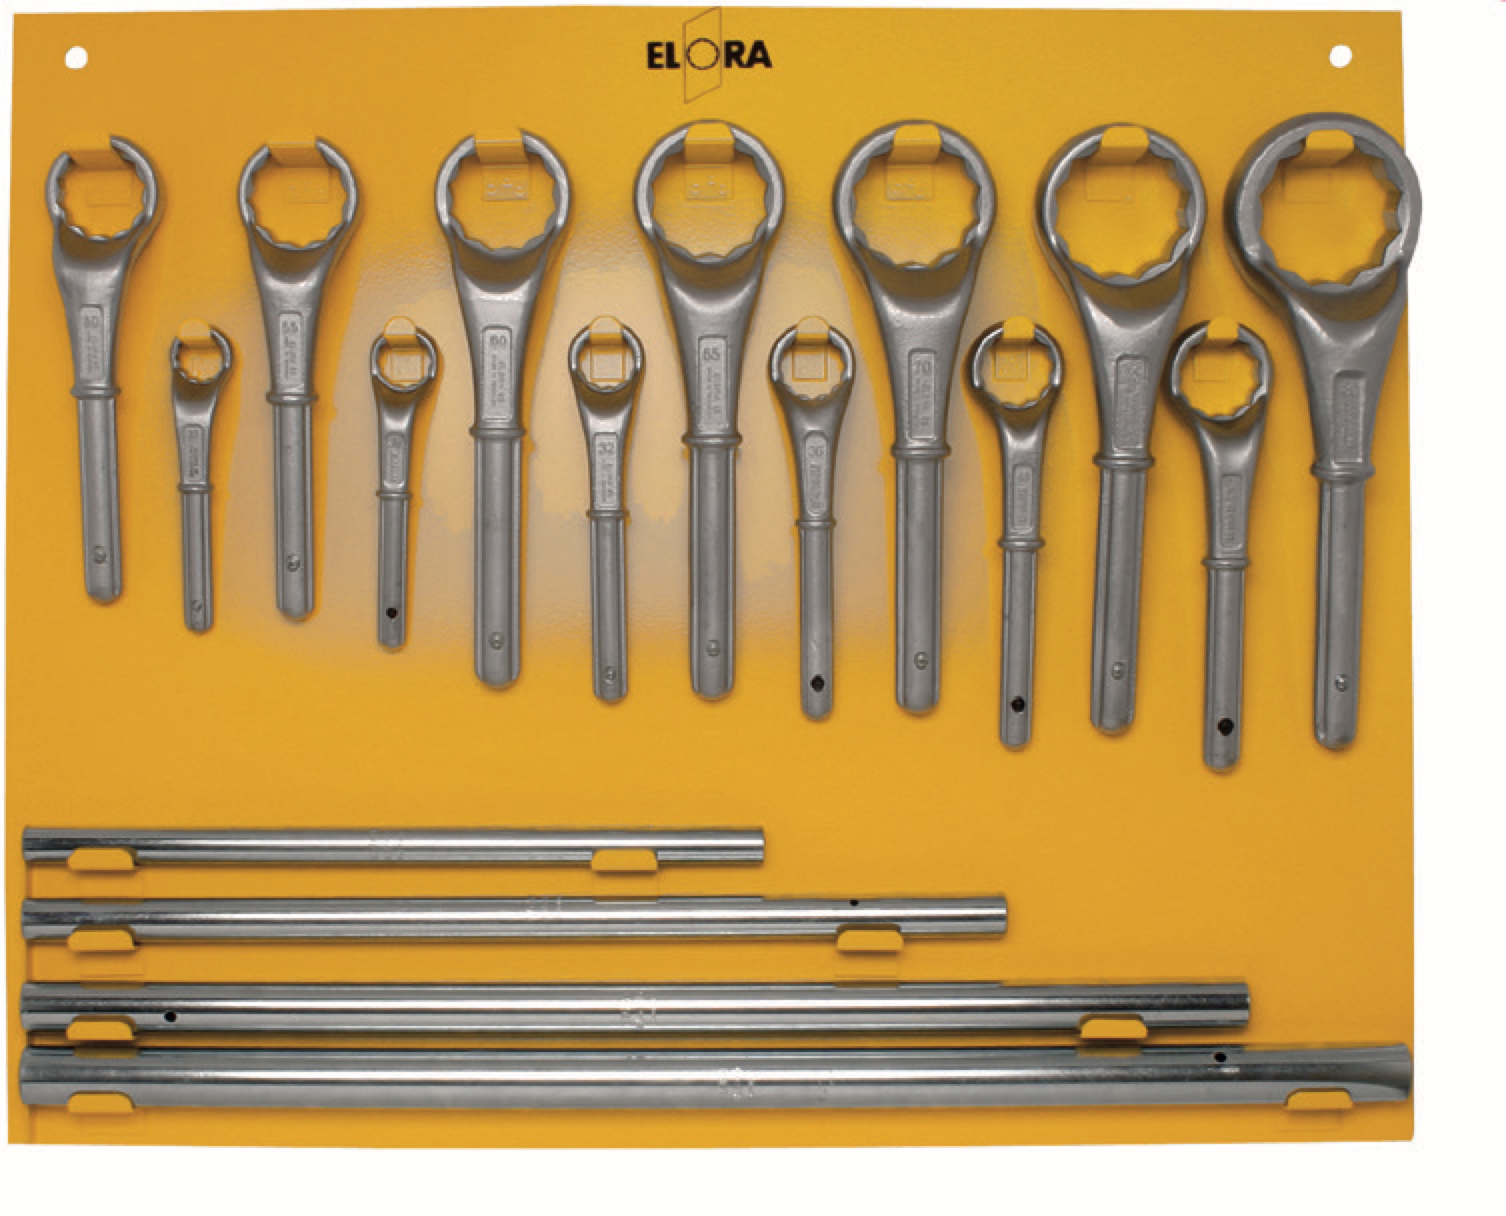 ELORA 85L Construction Ring Spanner Set Empty (ELORA Tools) - Premium Ring Spanner Set from ELORA - Shop now at Yew Aik.